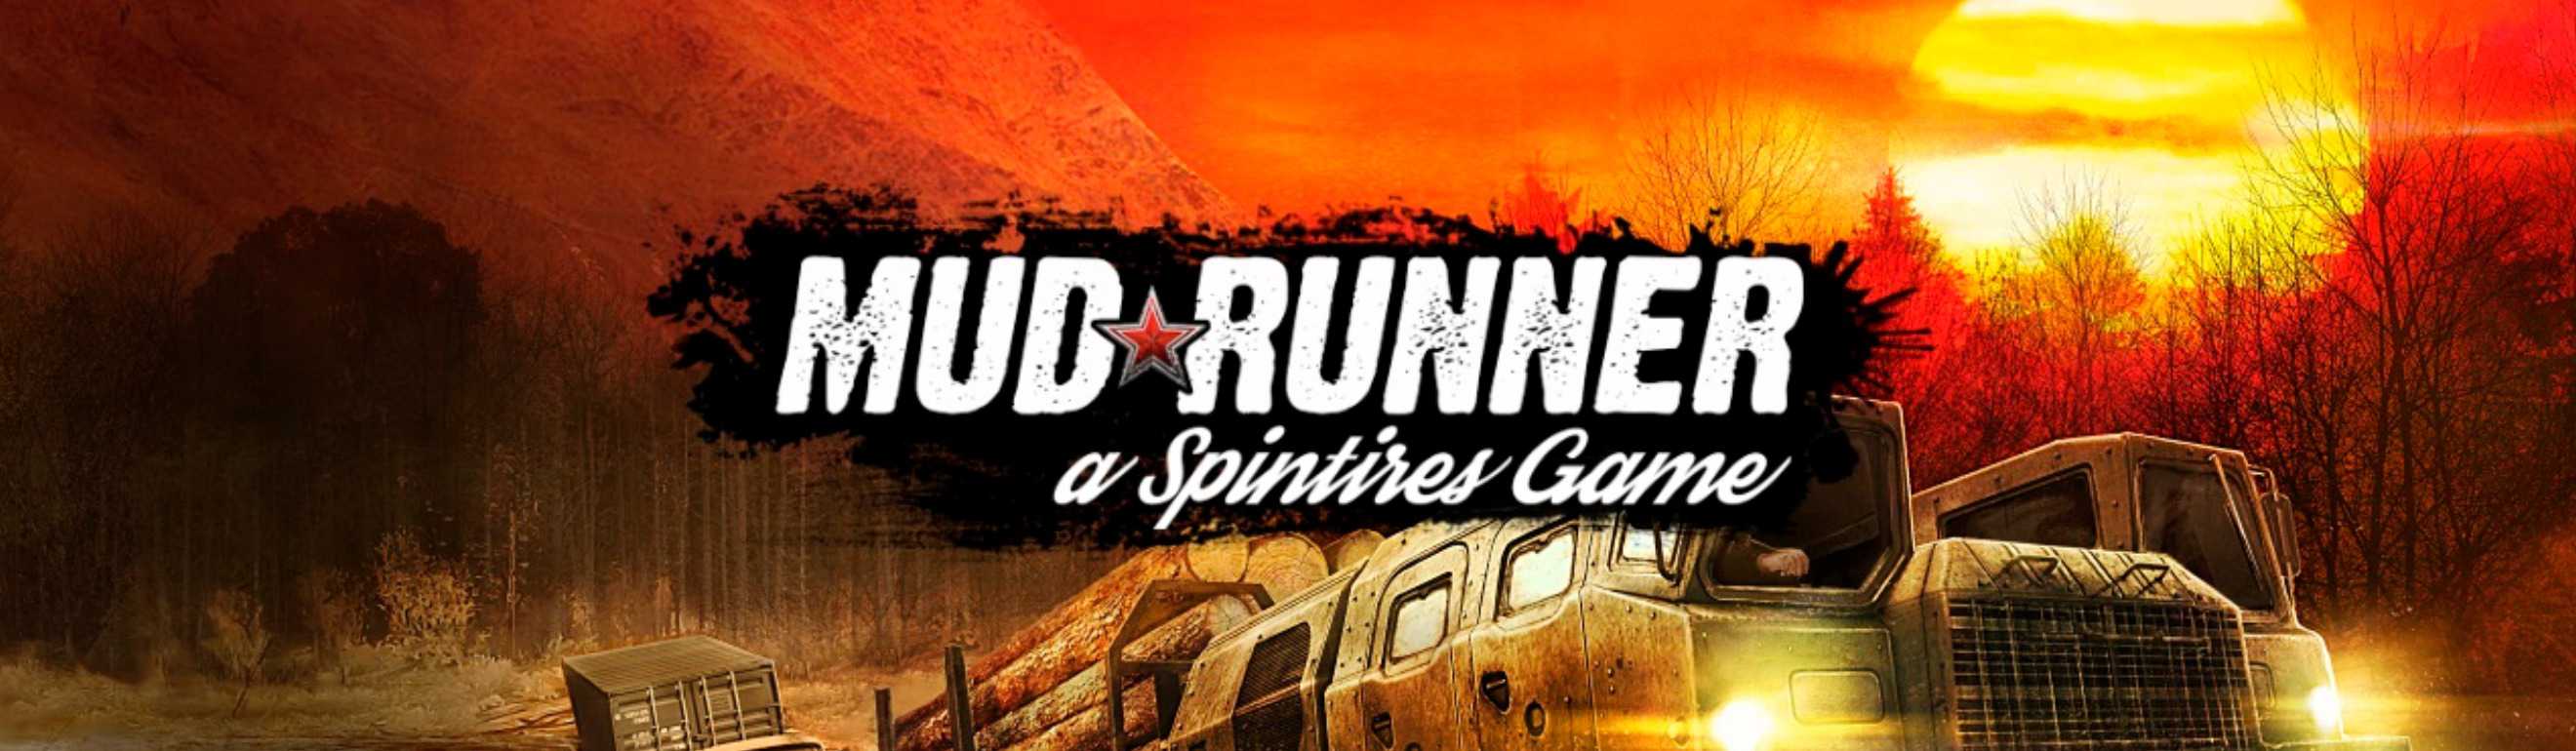 Steam connection required mudrunner фото 83